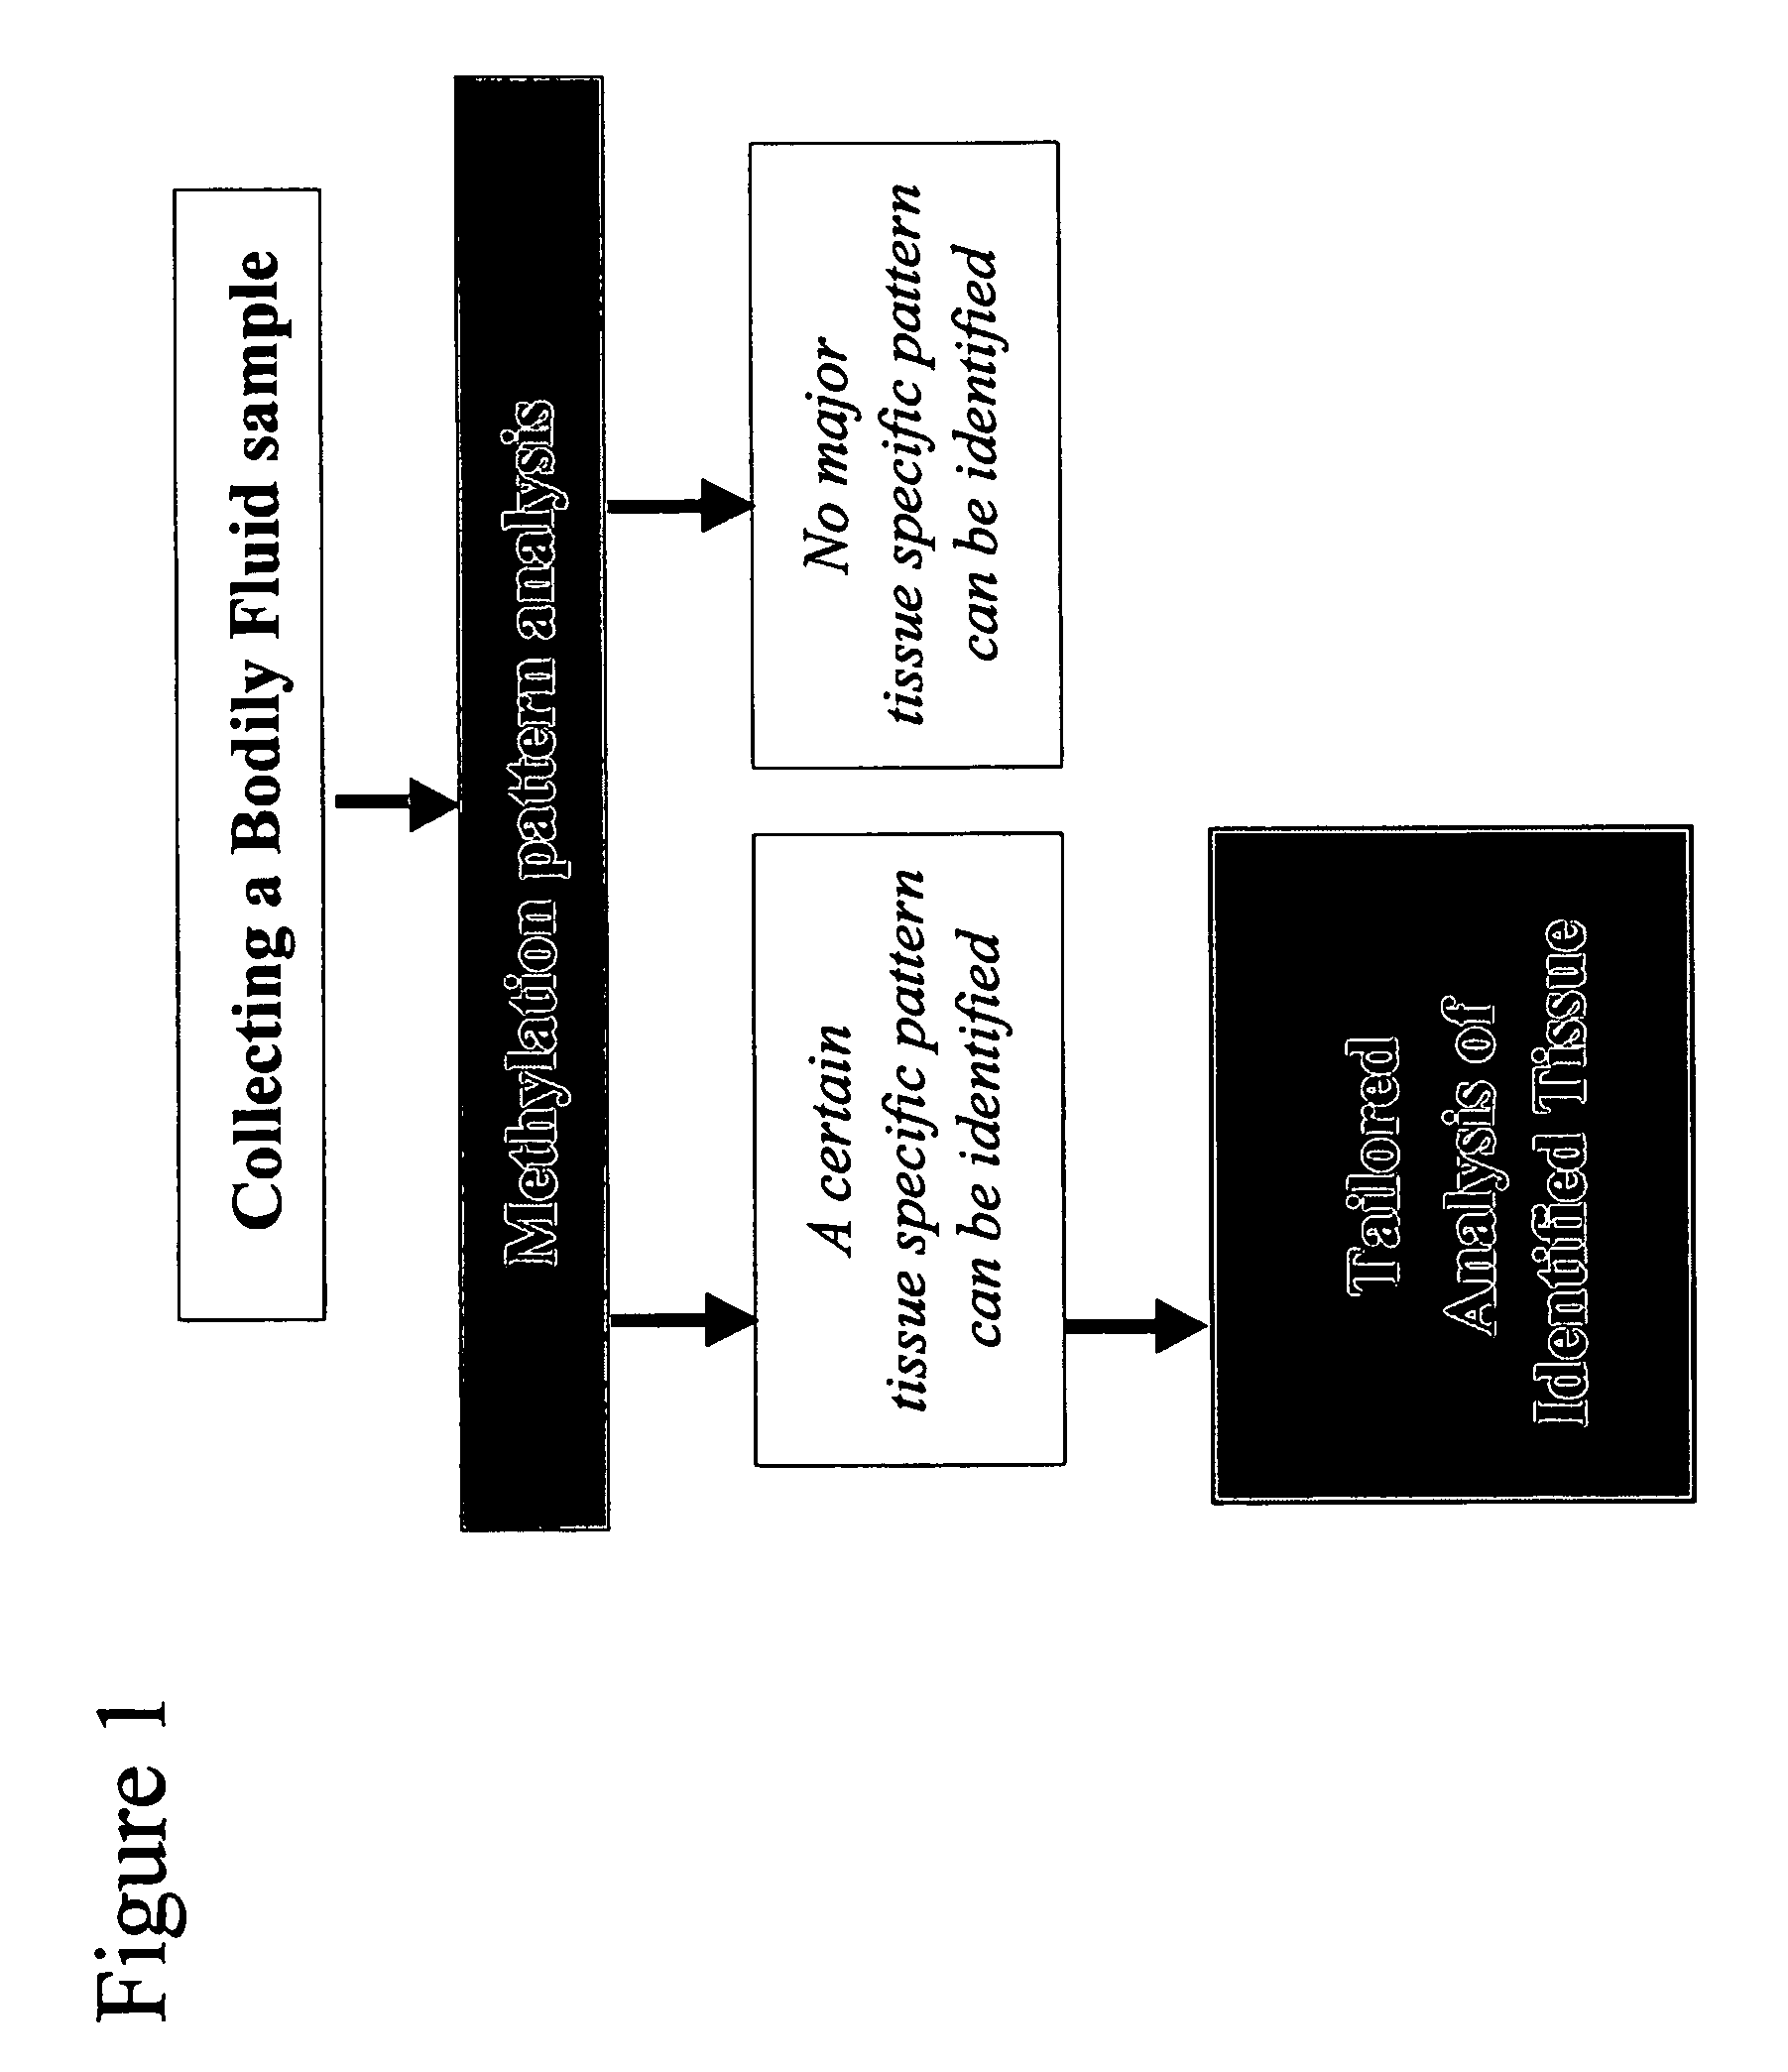 Method and device for determination of tissue specificity of free floating dna in bodily fluids